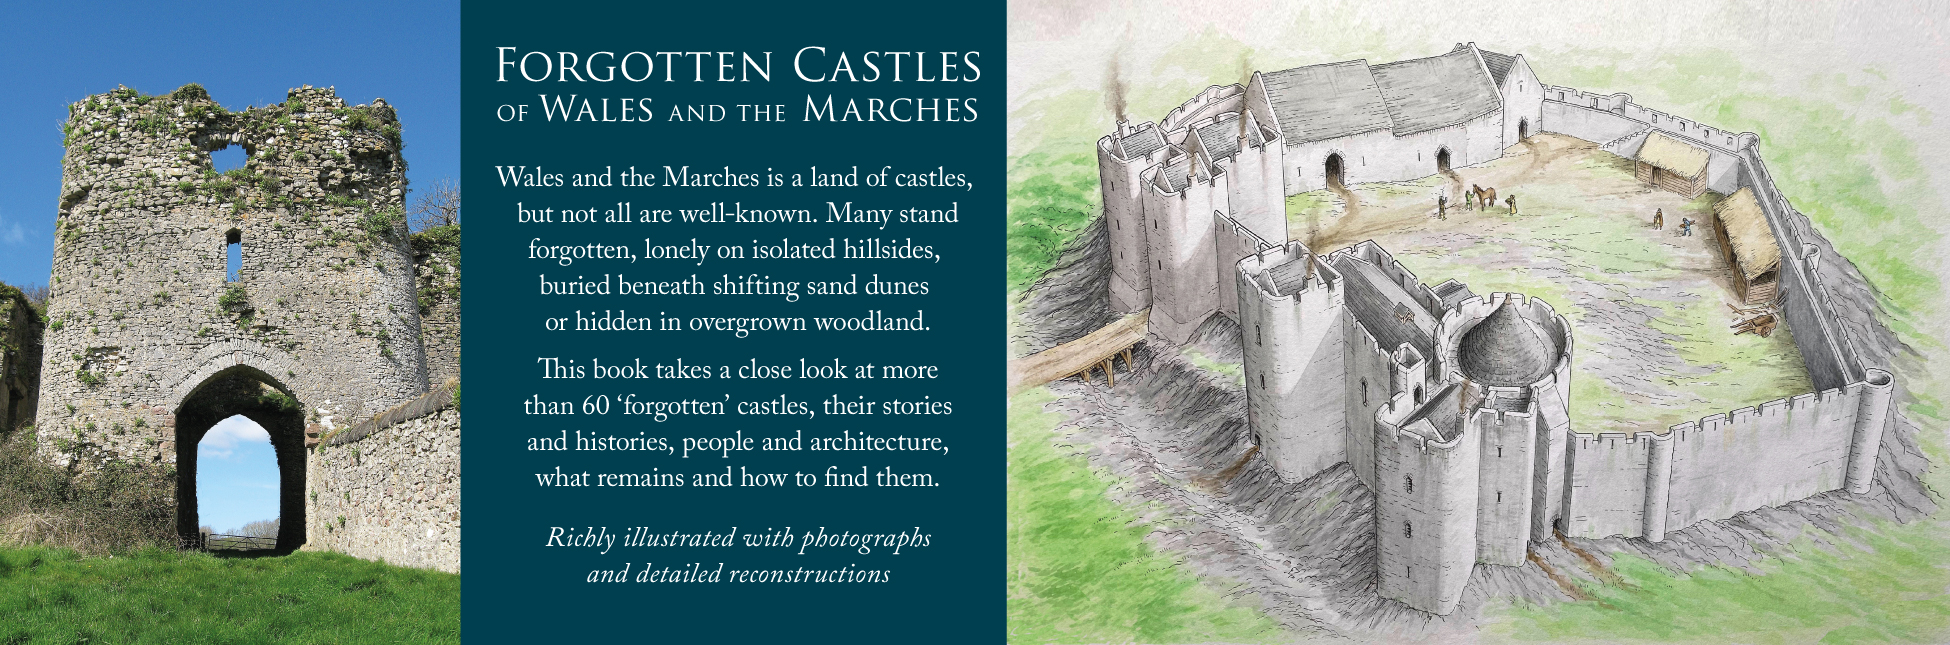 Forgotten Castles of Wales and the Marches banner